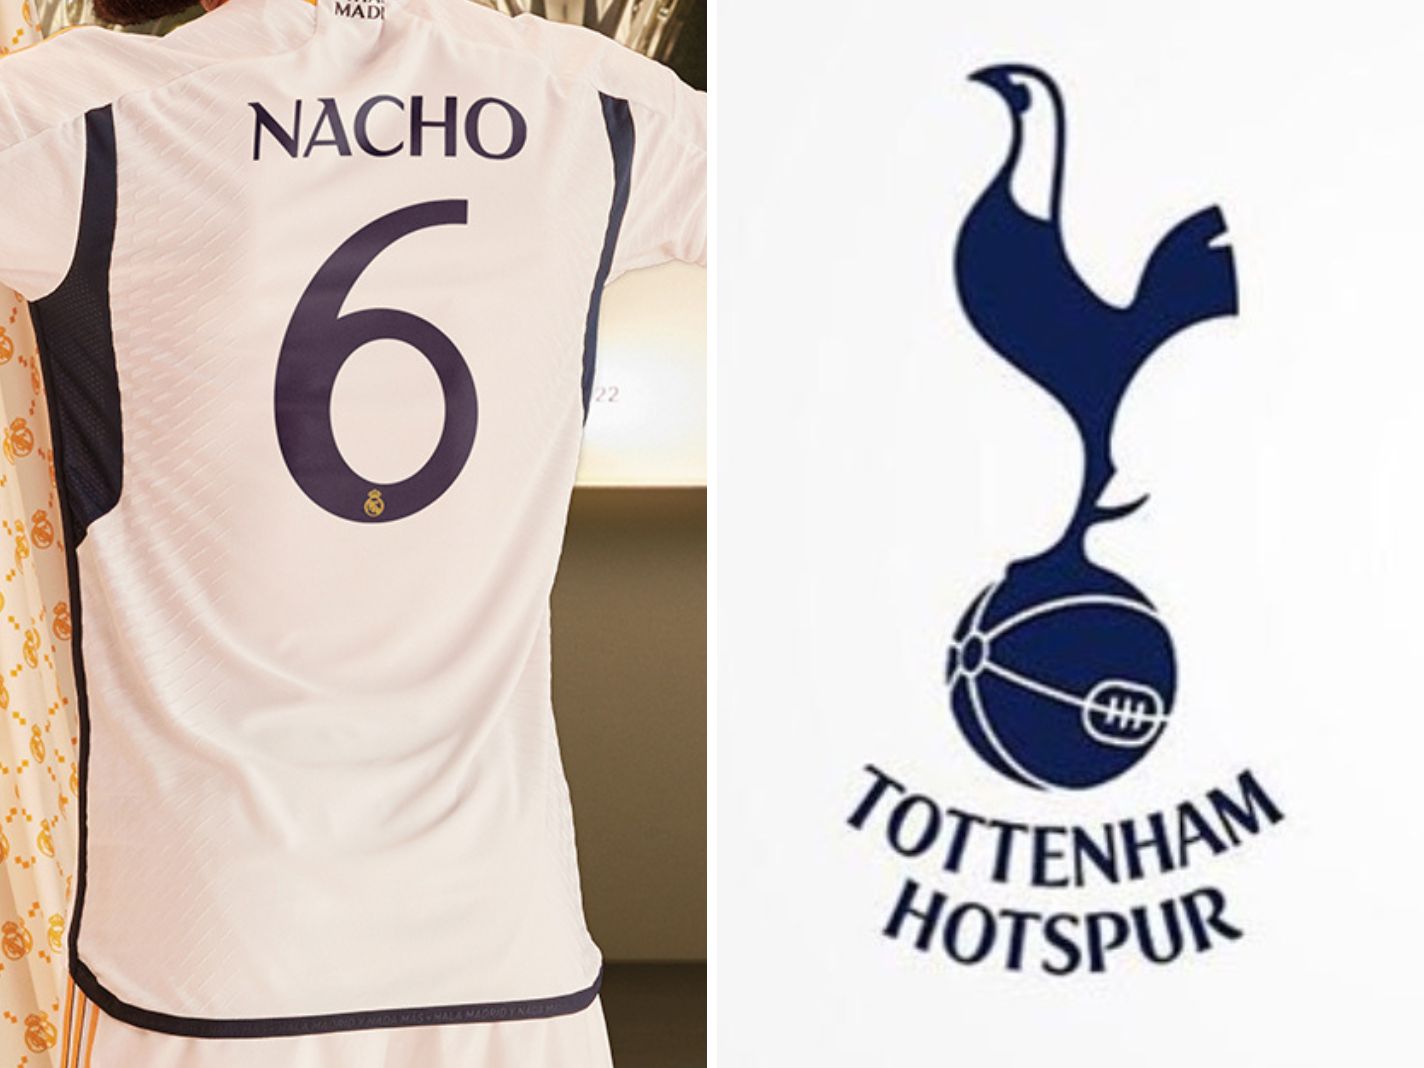 Fans Can’t Unsee Tottenham in 23/24 Real Madrid Home Kit Design